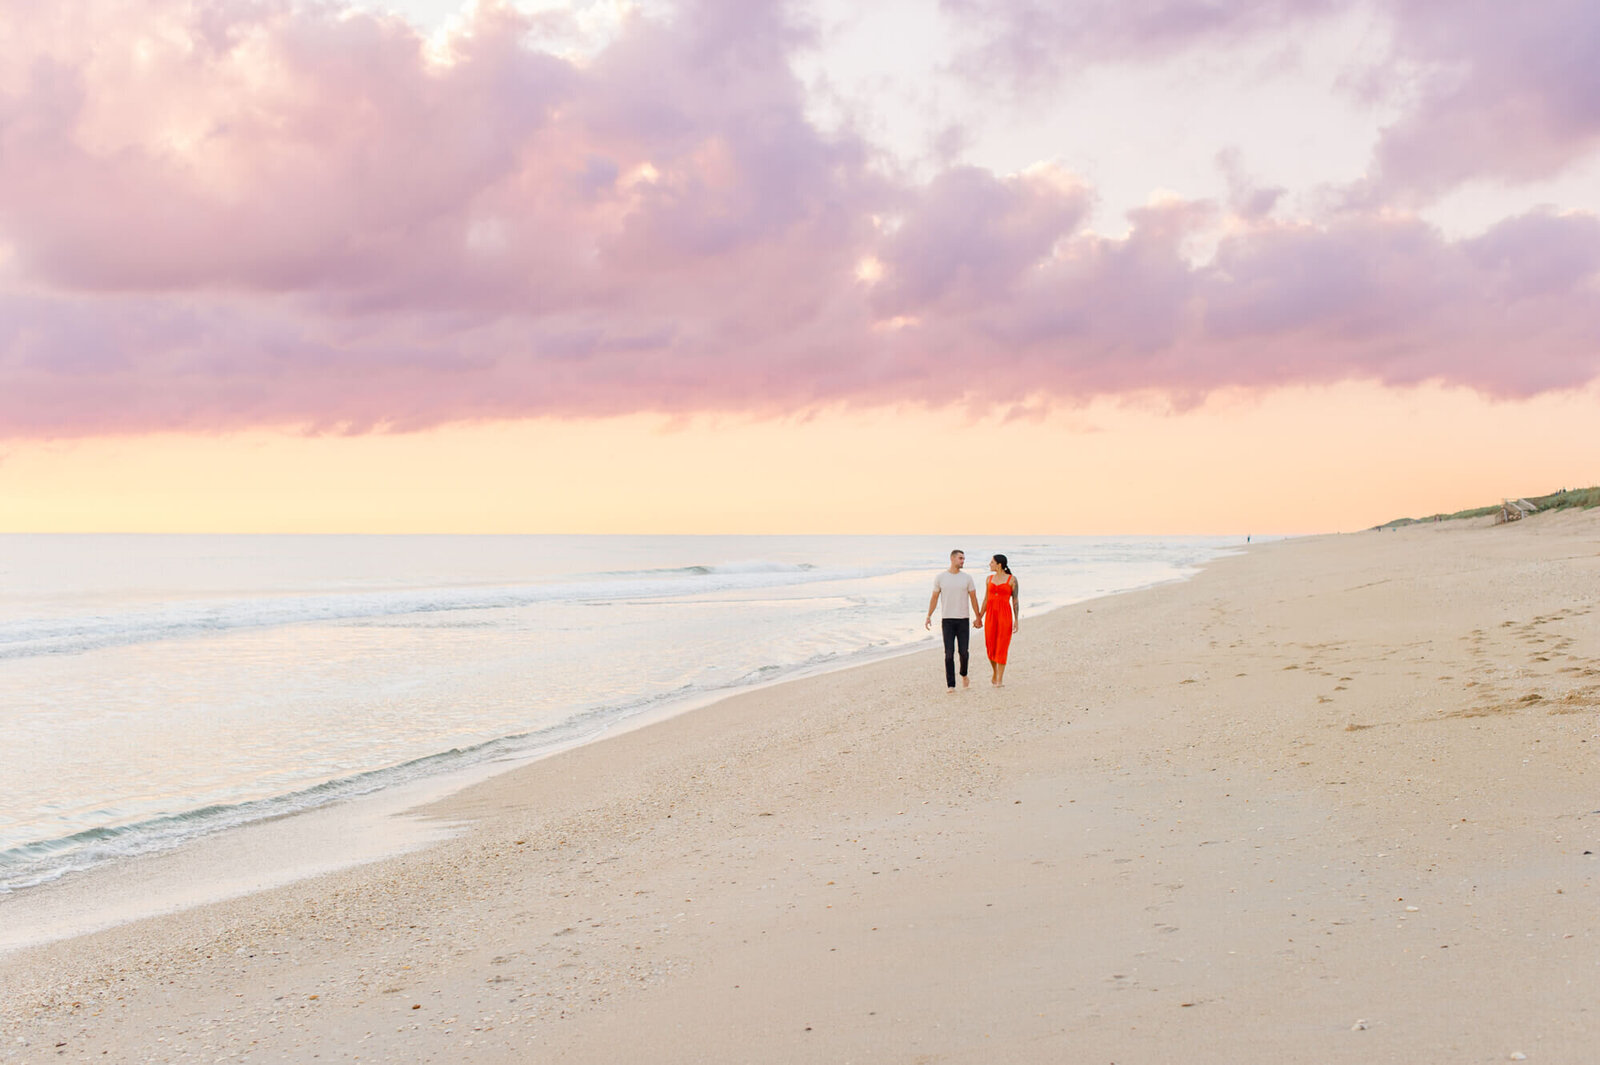 Orlando couple walks along the beach holding hands during their sunrise proposal photographer session